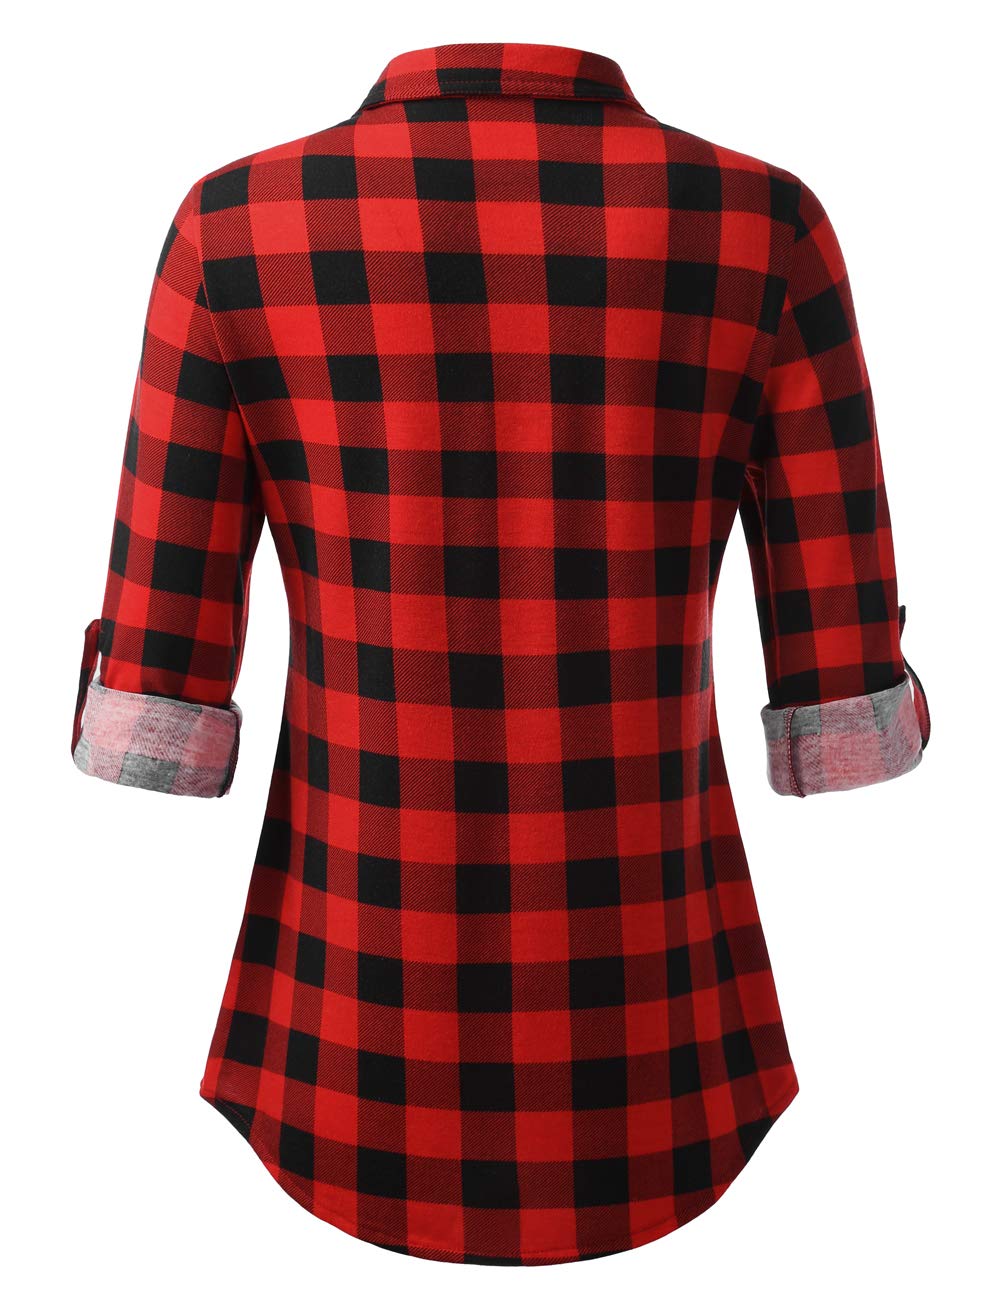 DJT Roll Up Long Sleeve Red Plaid Women’s Collared Button Down Plaid Shirt